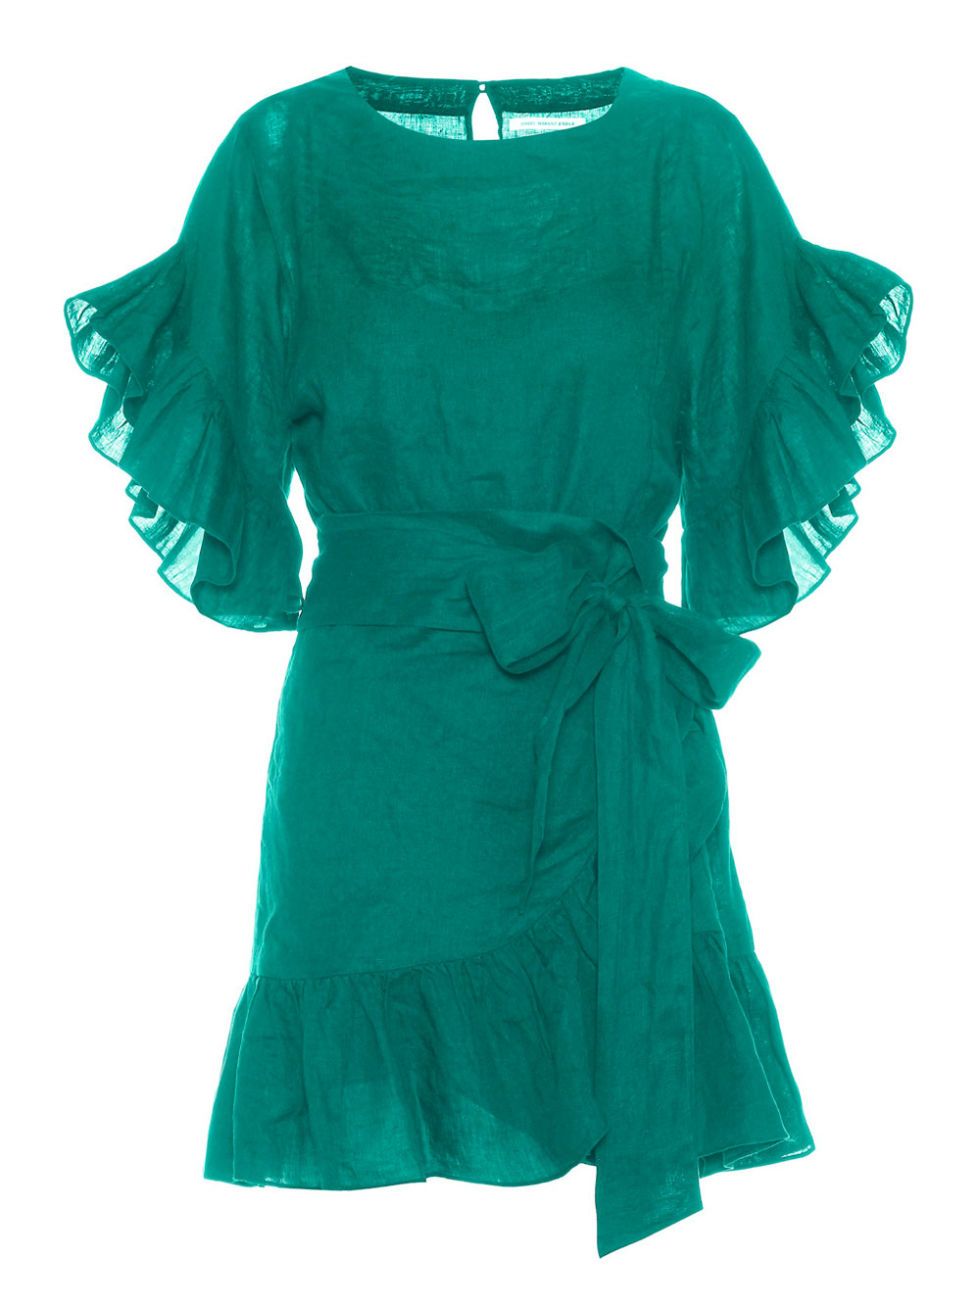 Clothing, Green, Day dress, Sleeve, Dress, Turquoise, Teal, Cocktail dress, Ruffle, Textile, 